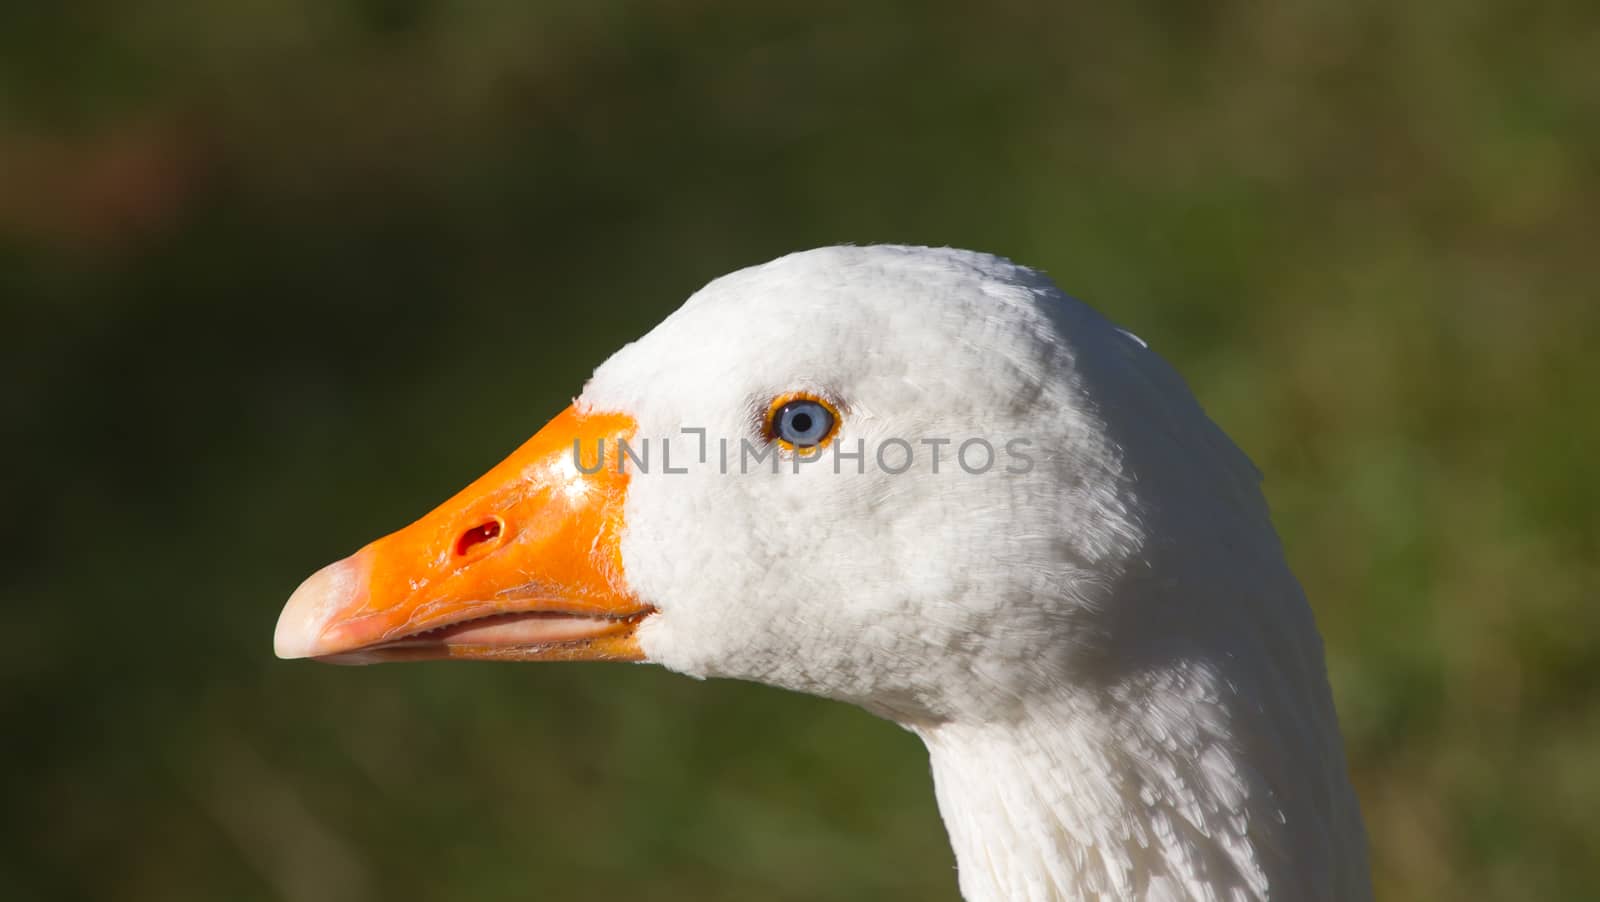 A close picture of a white goose head with a green background